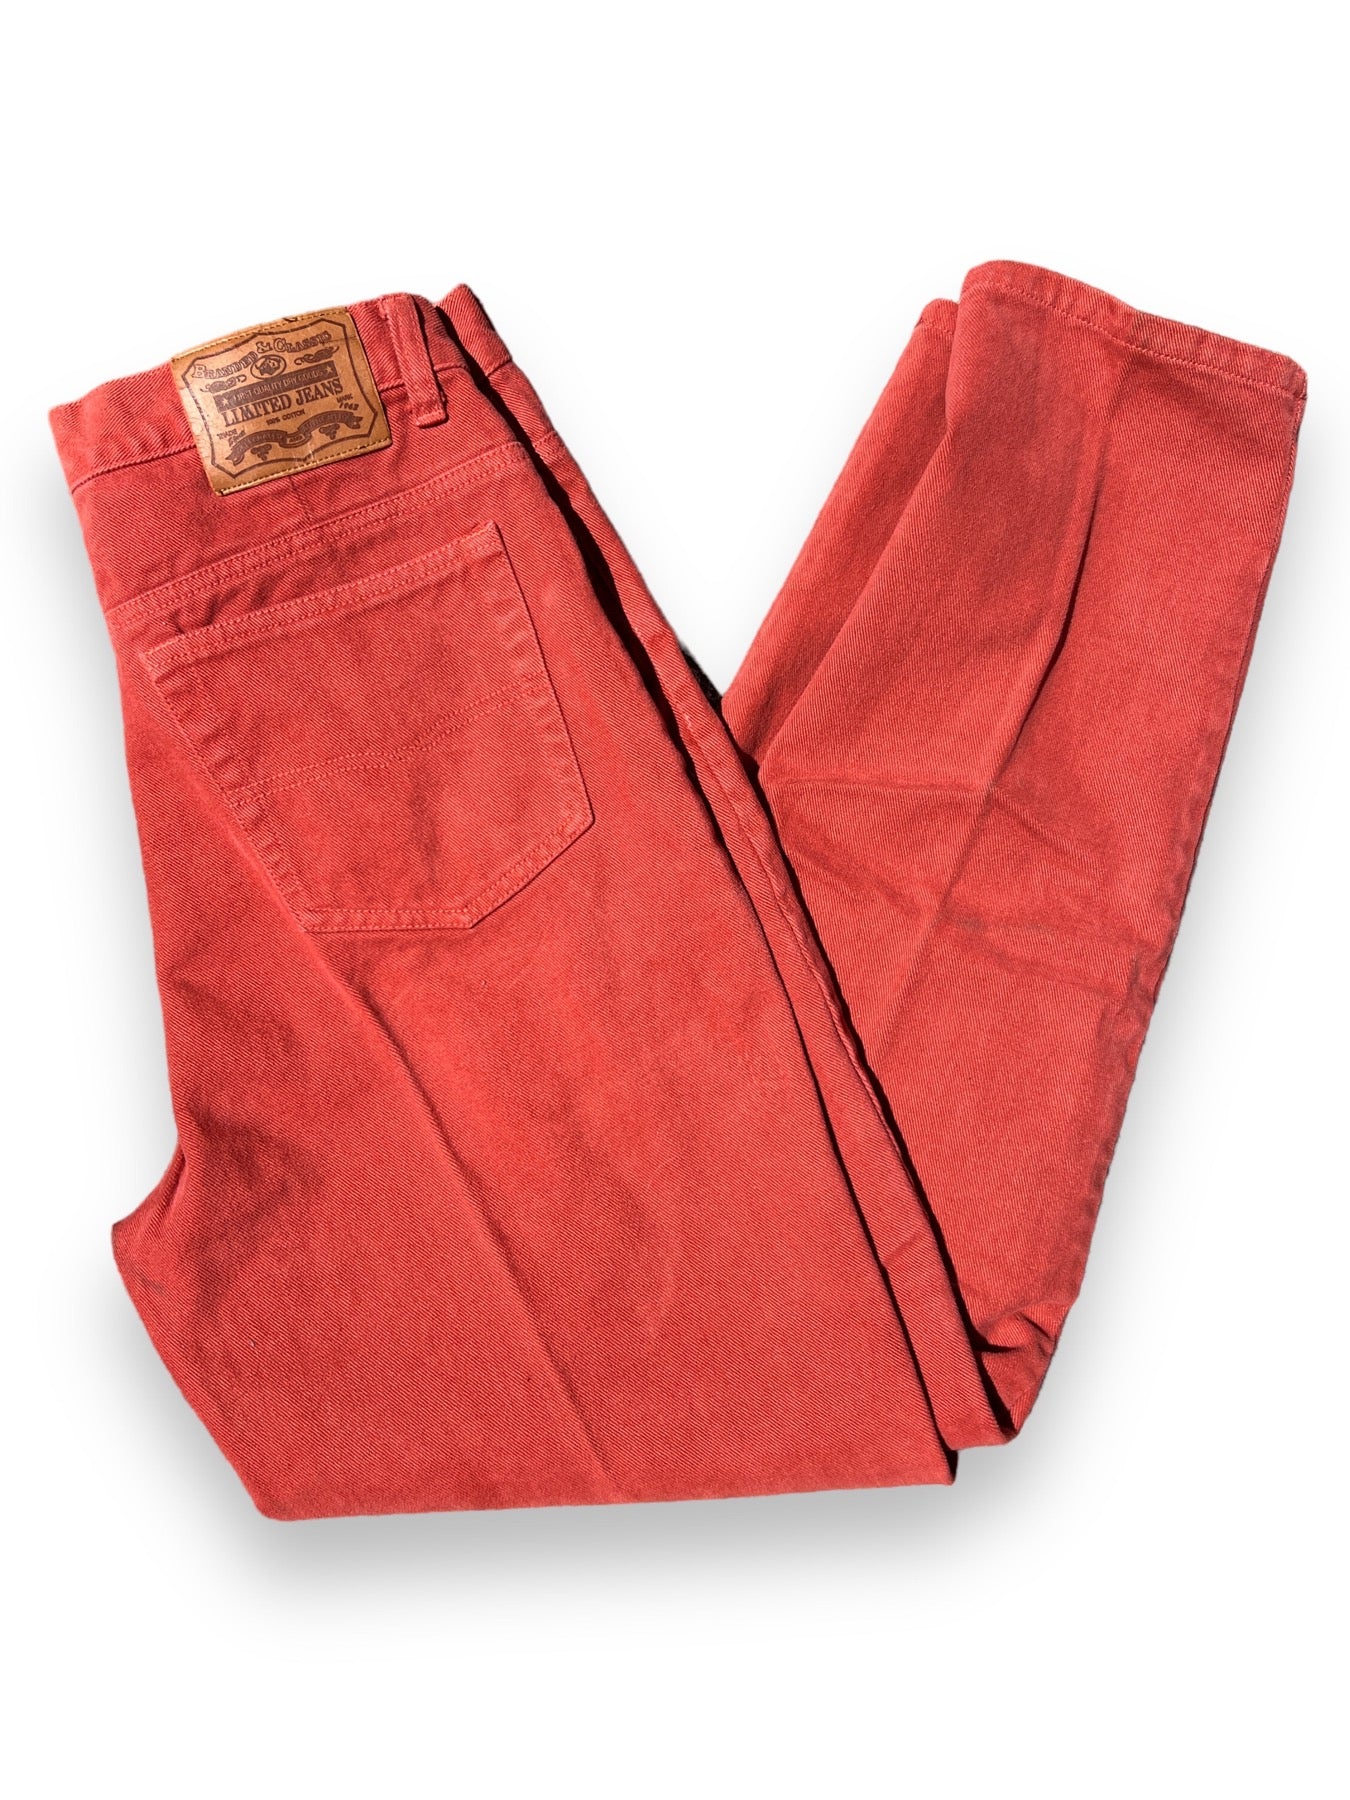 THE LIMITED TERRA COTTA JEANS